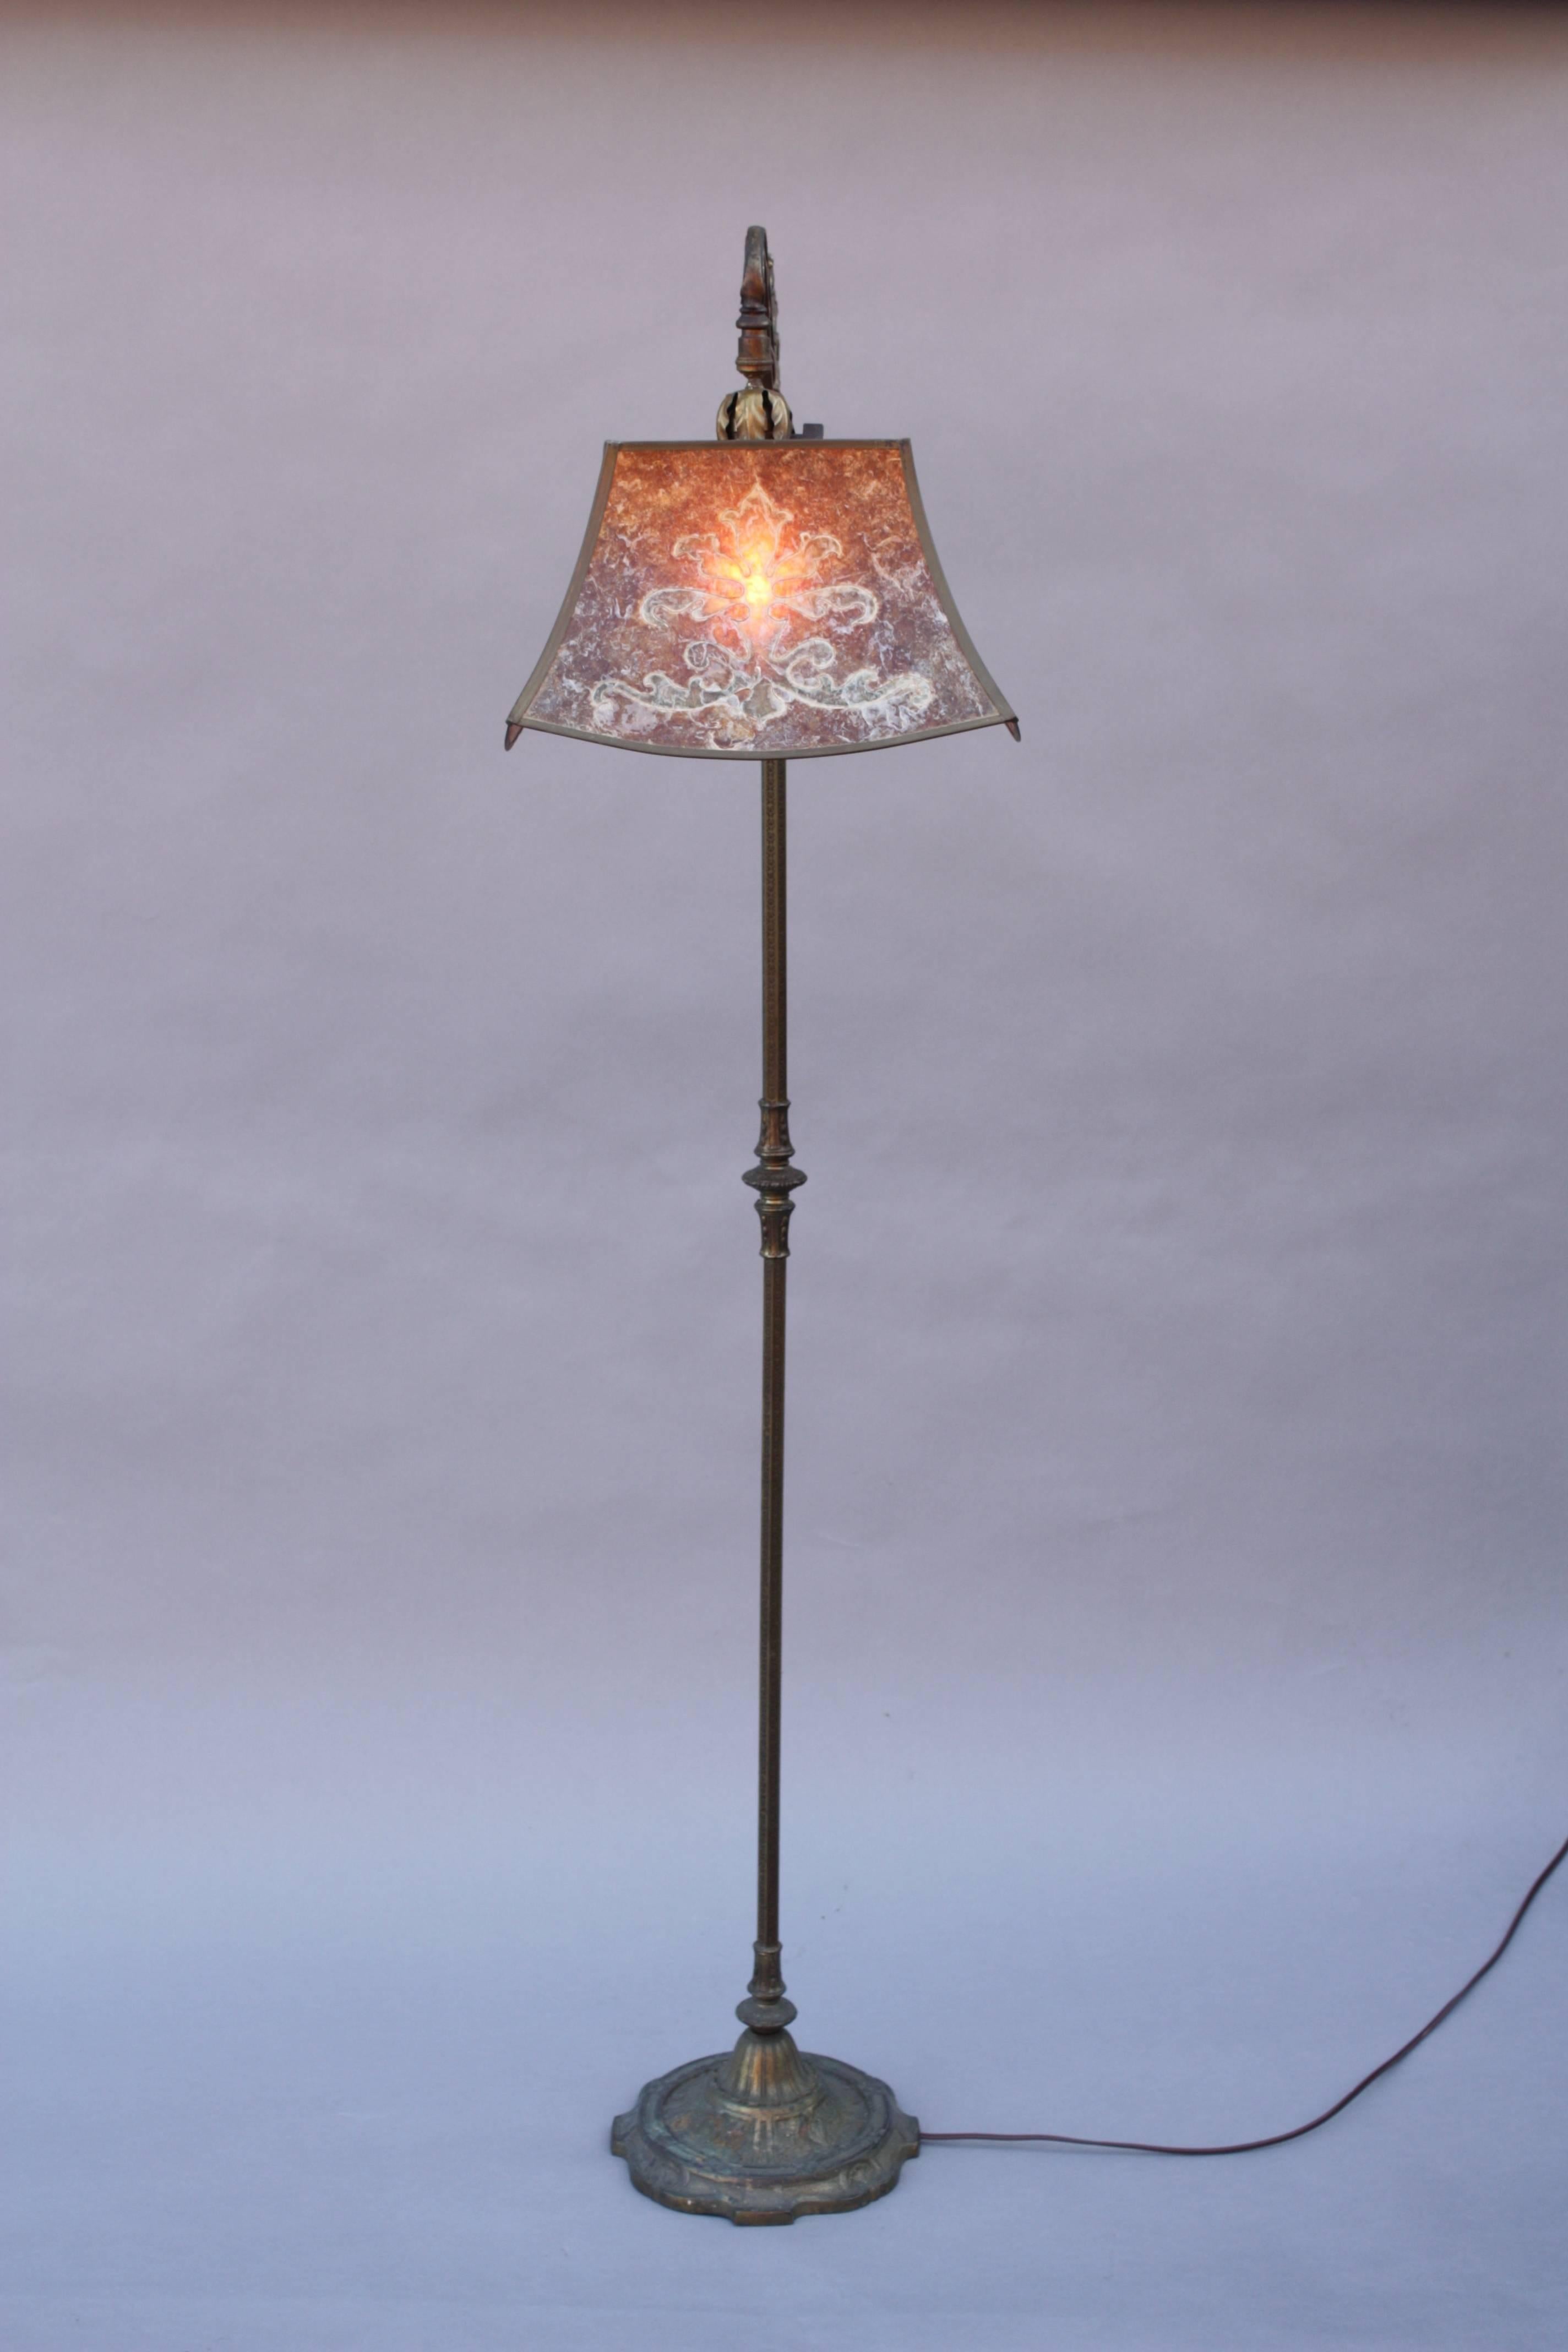 1920s Spanish Revival / Tudor floor lamp with hard to find knight motif and beautiful original mica shade.